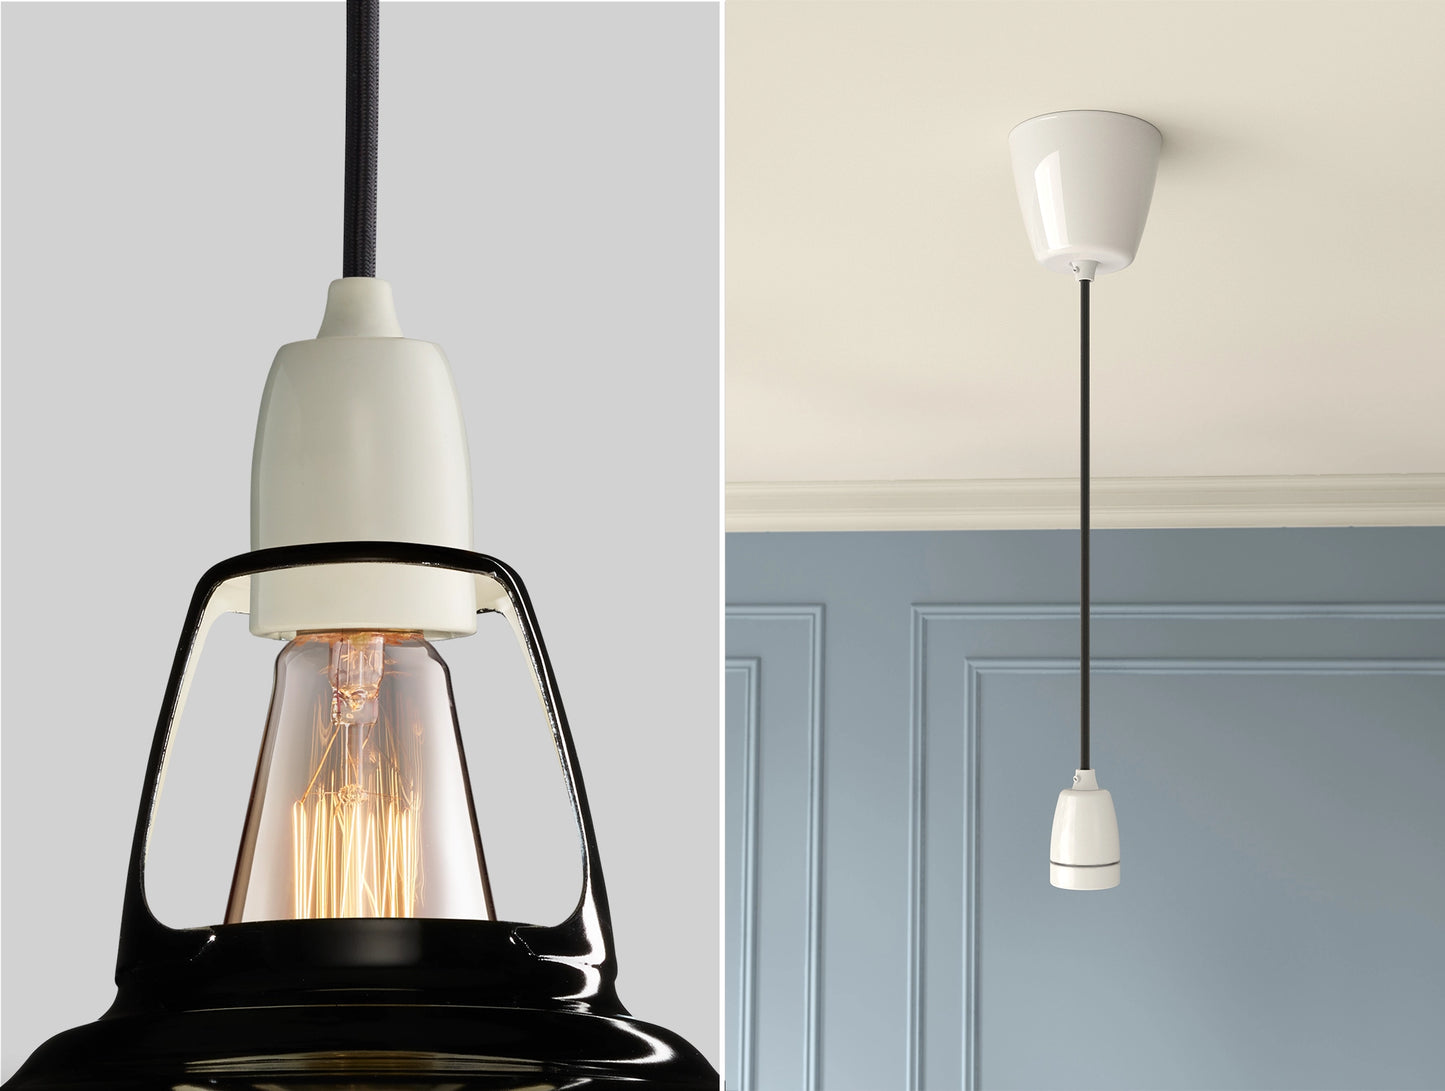 Close up of an E27 Porcelain suspension set on a Jet Black lampshade on the left. On the right, an E27 Porcelain pendant set is hanging from the ceiling